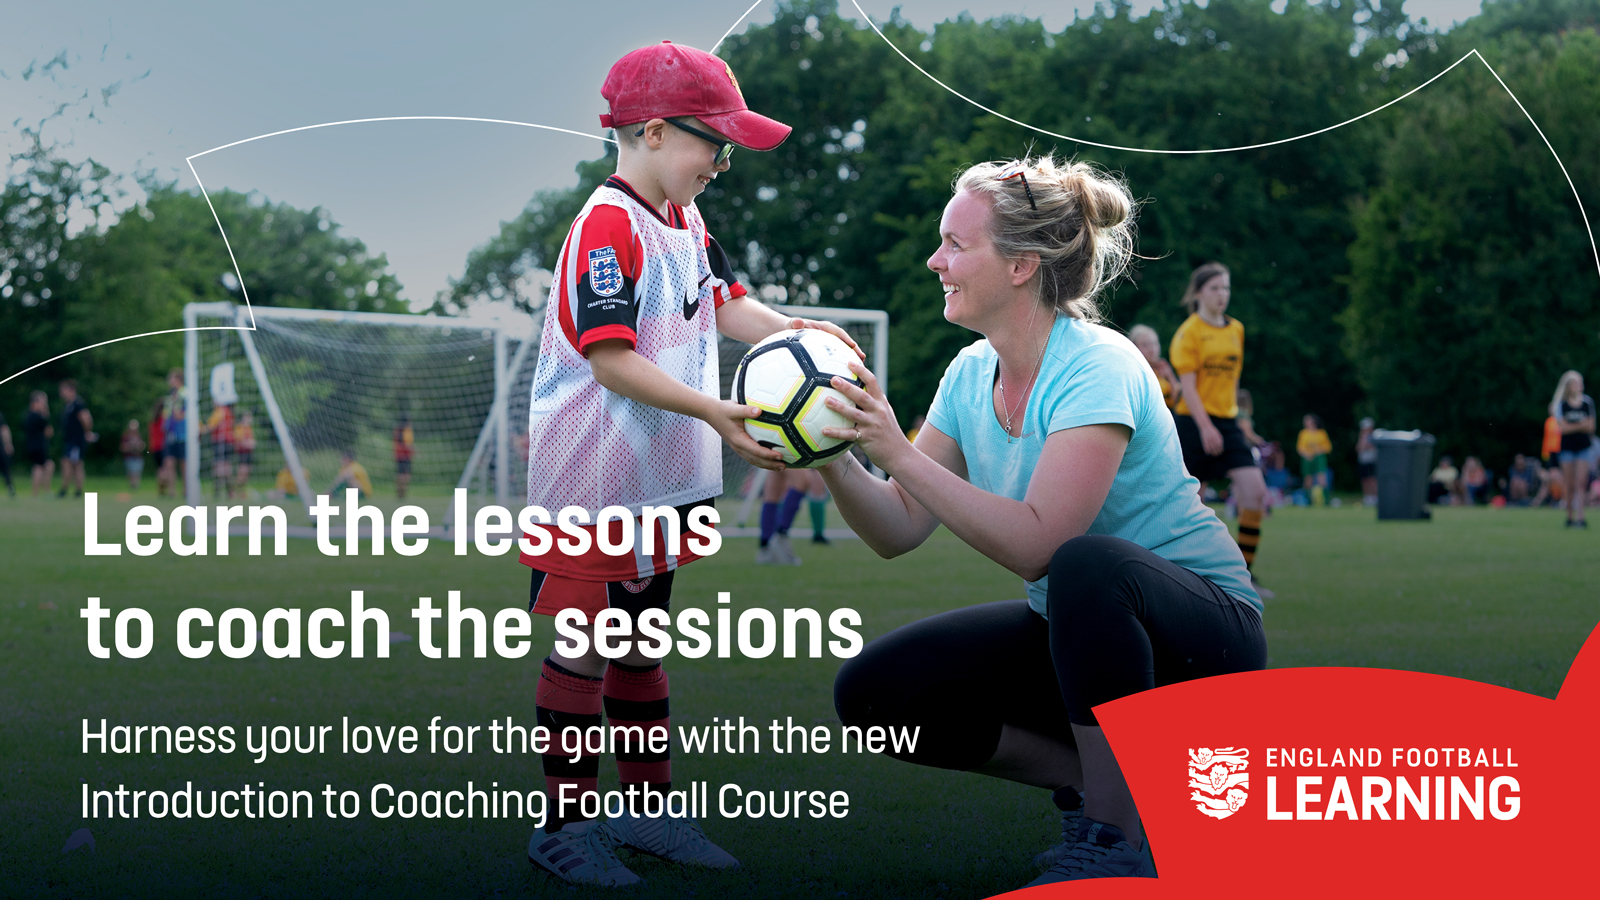 Introduction to Coaching Football Course